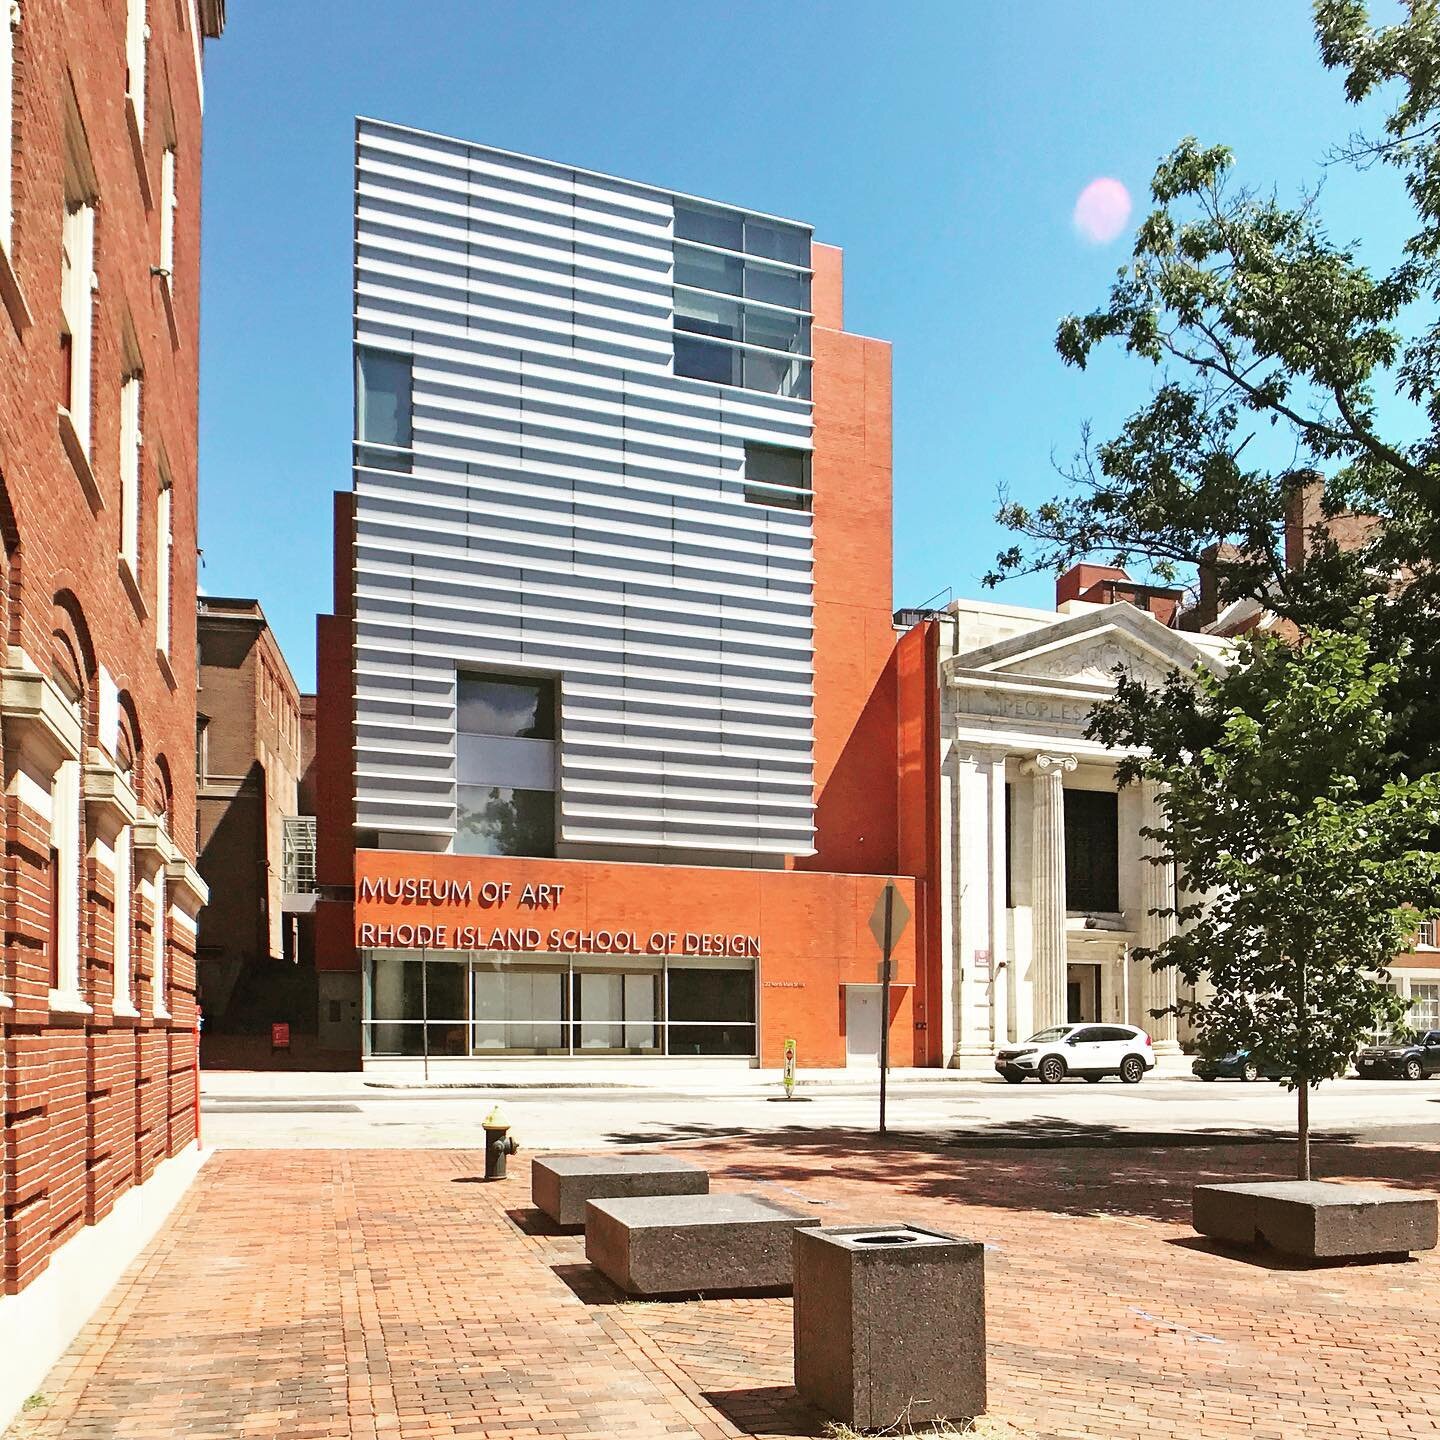 RISD Museum. It still looks sharp and fresh. It is almost 15years since its opening. #rafaelmoneo #risdmuseum #modernarchitecture